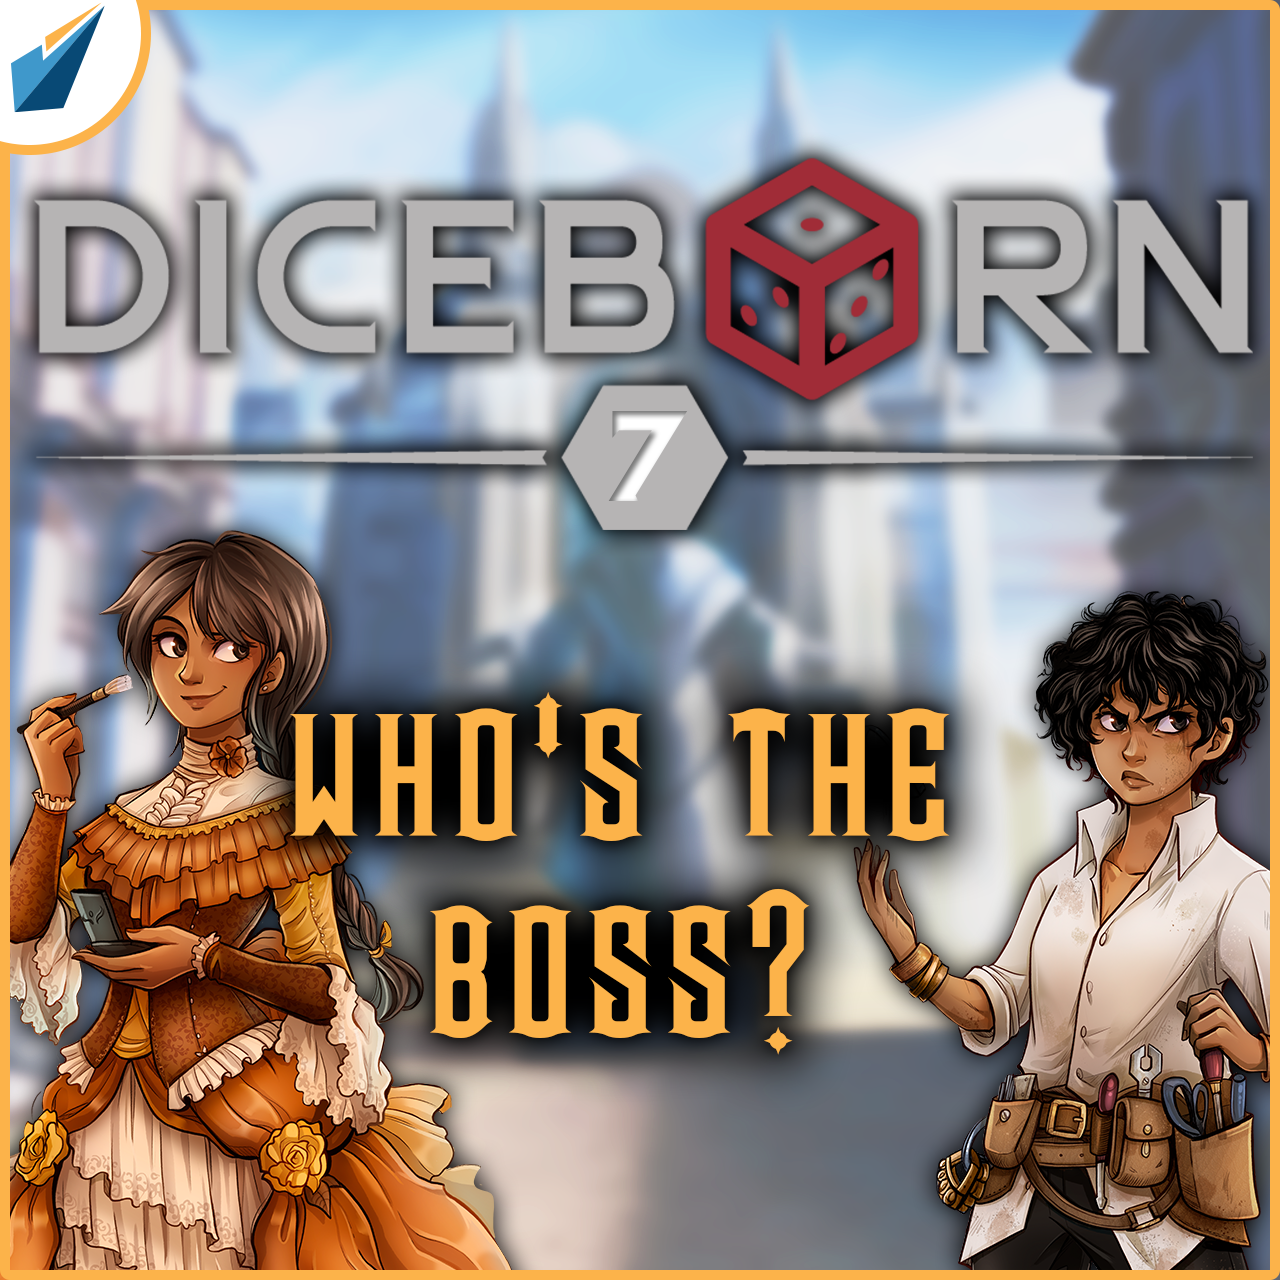 More information about "Diceborn: Episode 7 - Who's The Boss?"